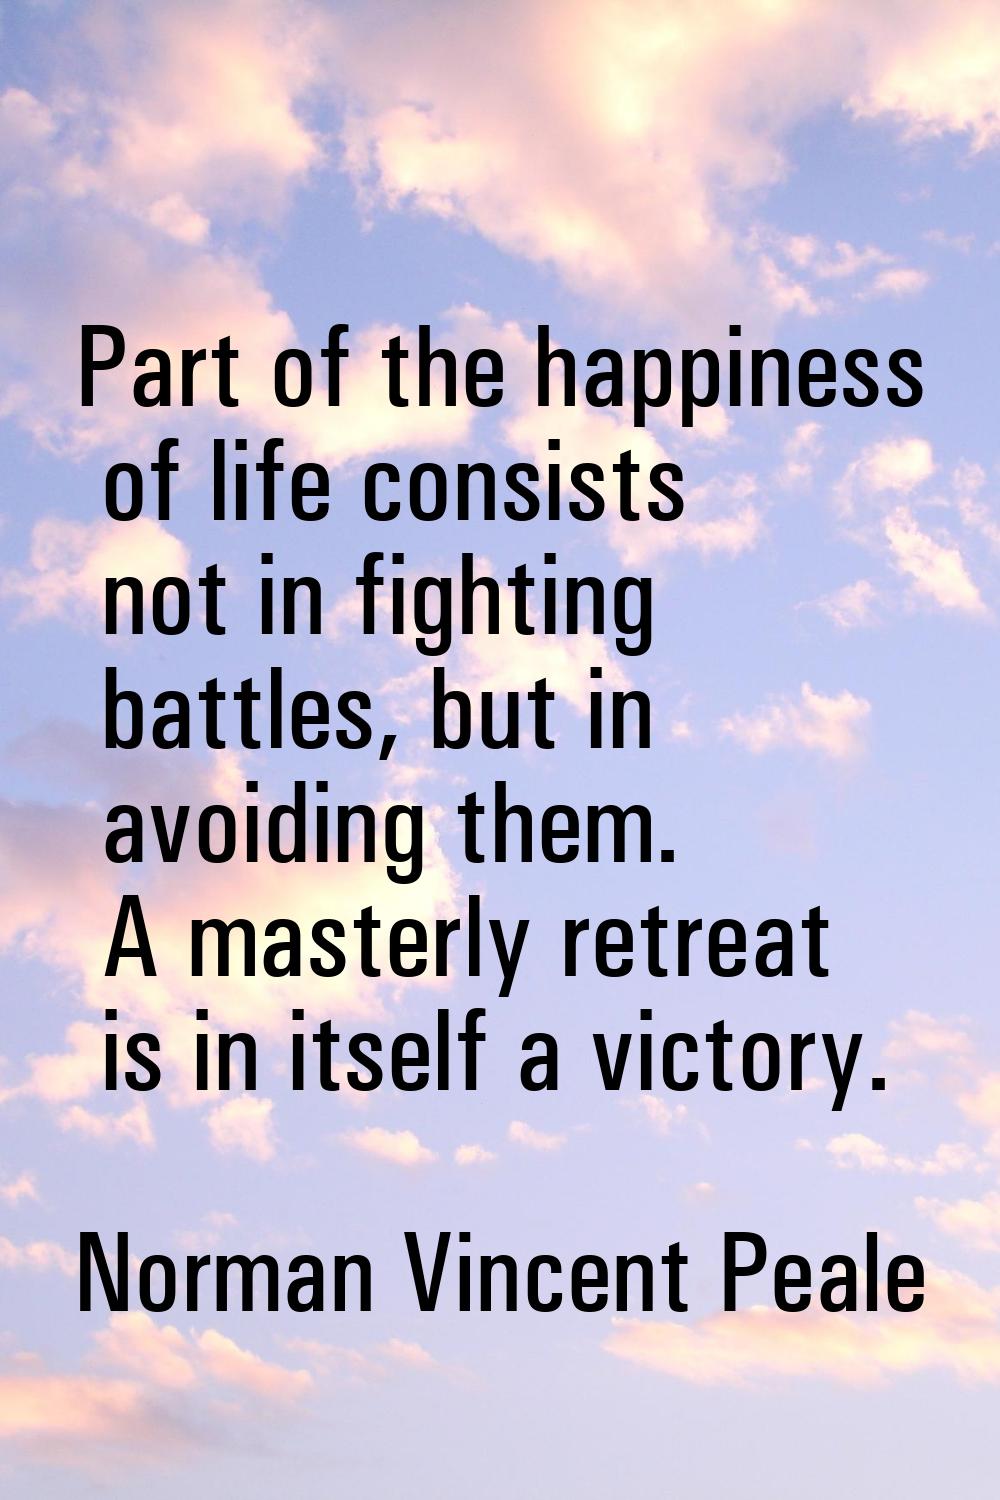 Part of the happiness of life consists not in fighting battles, but in avoiding them. A masterly re